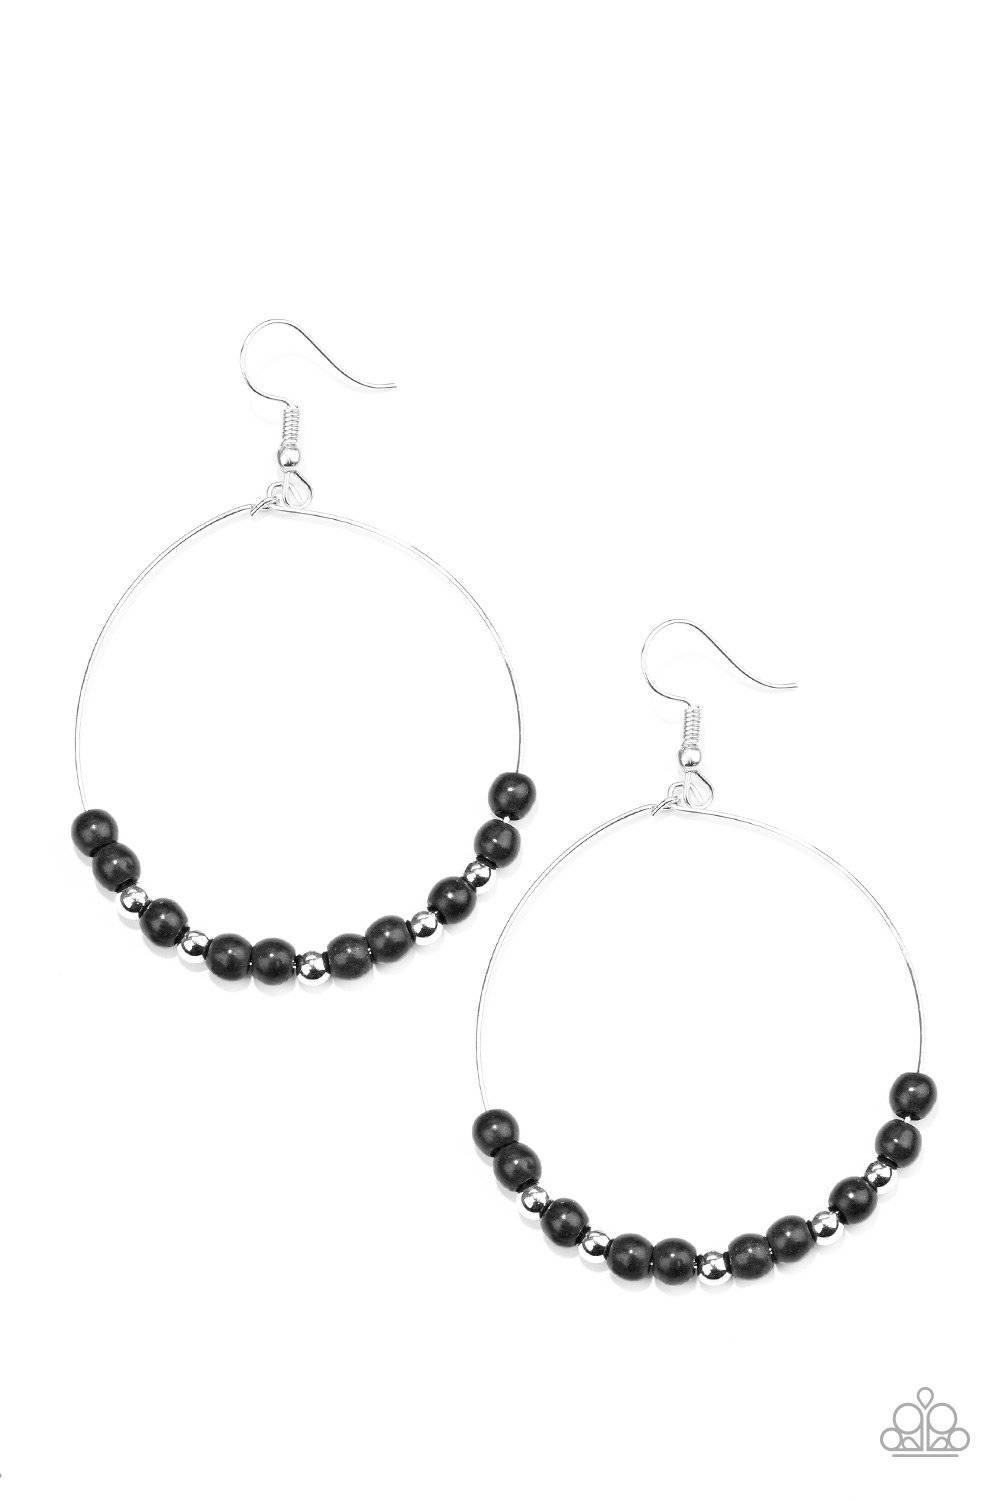 D311 - Stone Spa Black Earrings by Paparazzi Accessories on Fancy5Fashion.com